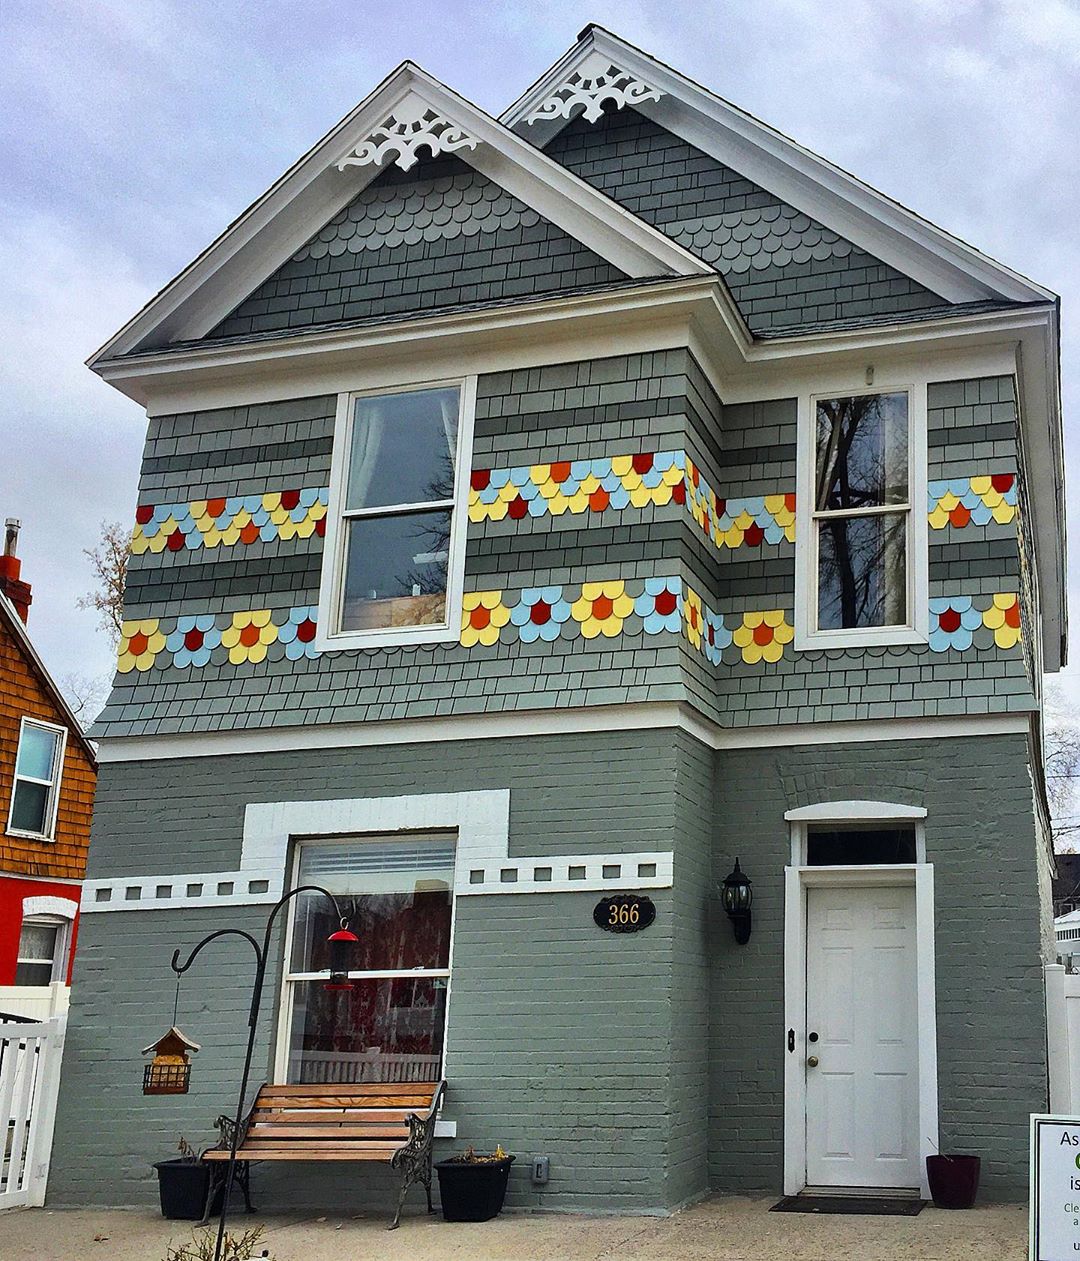 victorian style home with colored shingles in Liberty Wells, Salt Lake City photo by Instagram user @lovemyyanks